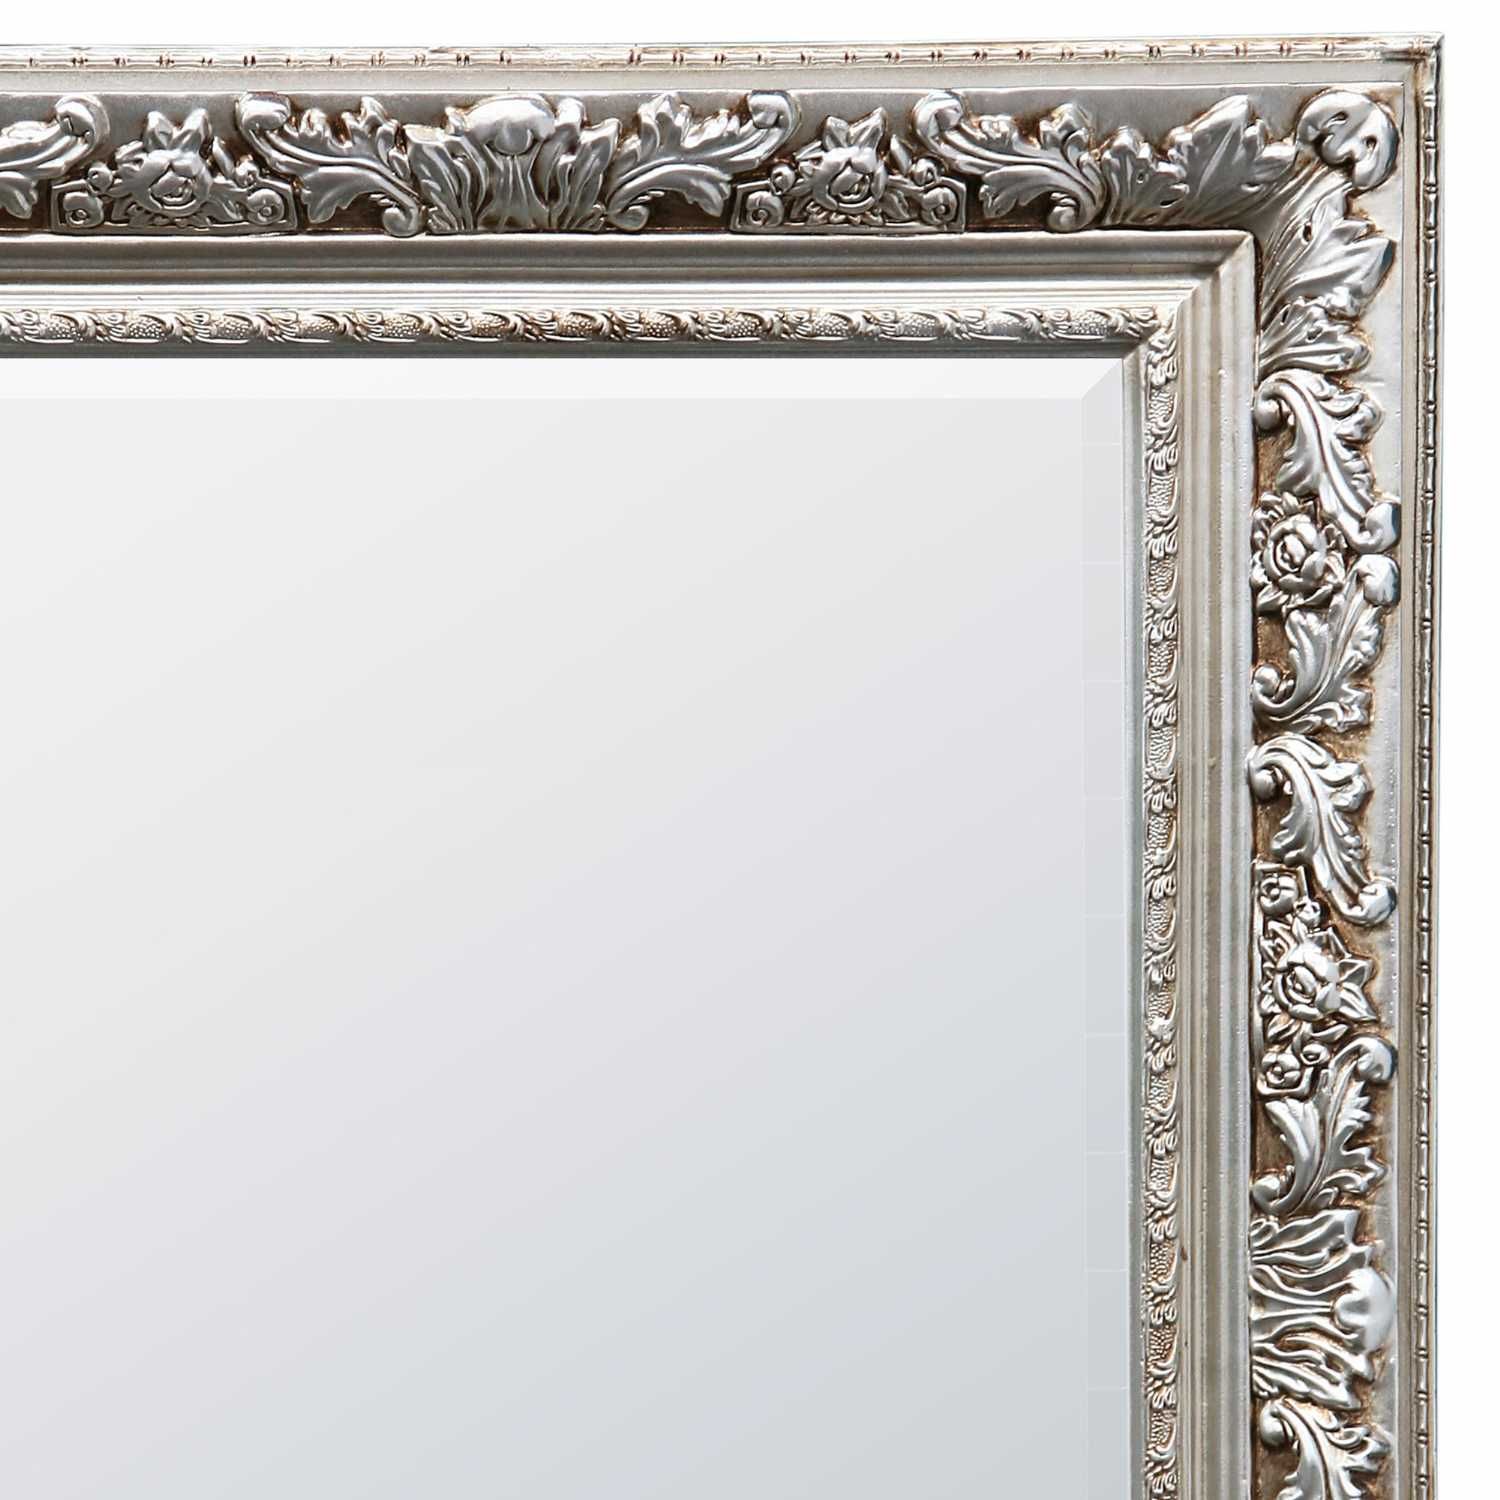 Antique Silver Decorative Leaf Design Framed Bevelled Wall Mirror Intended For Antiqued Gold Leaf Wall Mirrors (View 15 of 15)